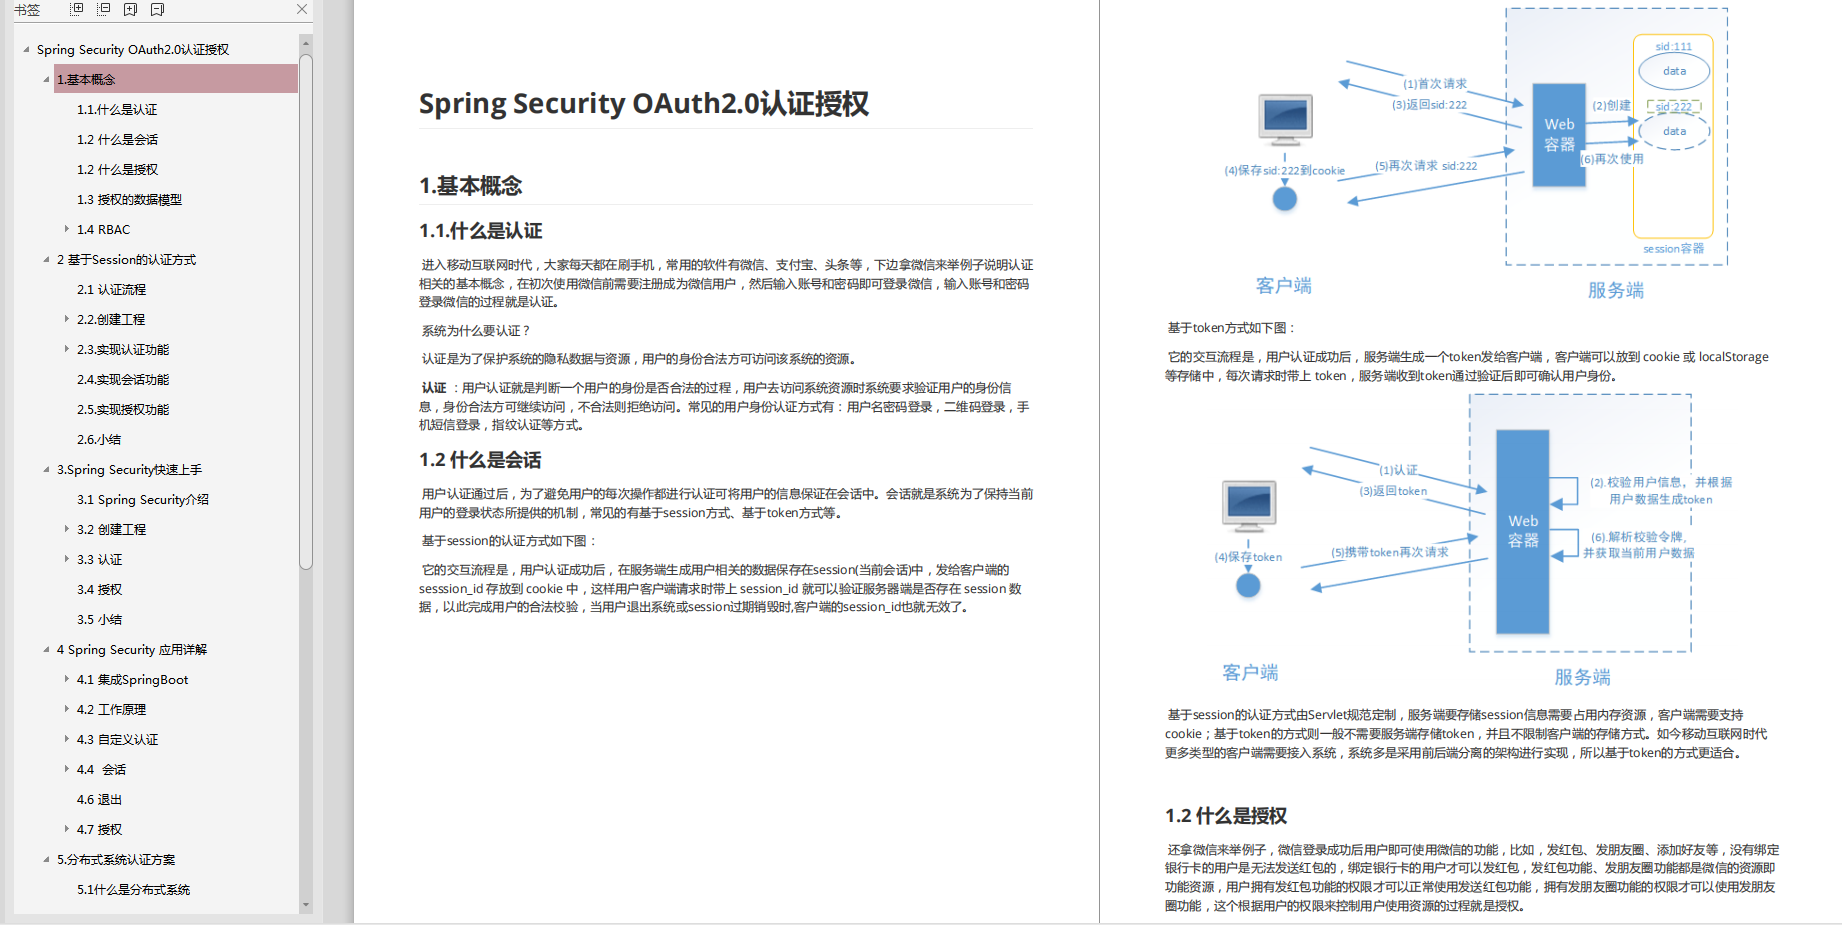 The liver is bald!  Alibaba's top version of Spring Security notes